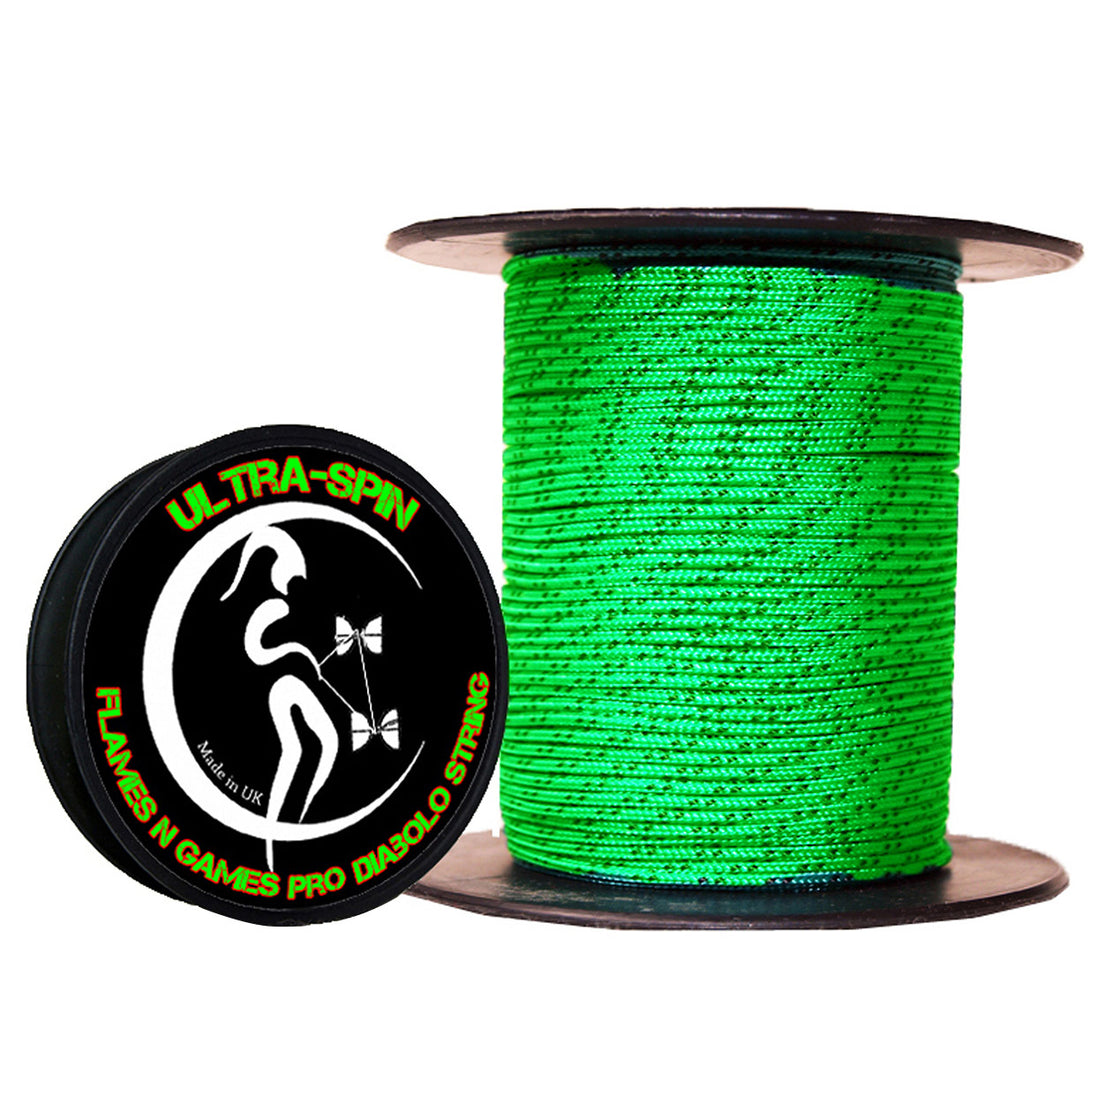 Flames N' Games ULTRA-SPIN Pro Diabolo String 25meter Reel Green and Black colour